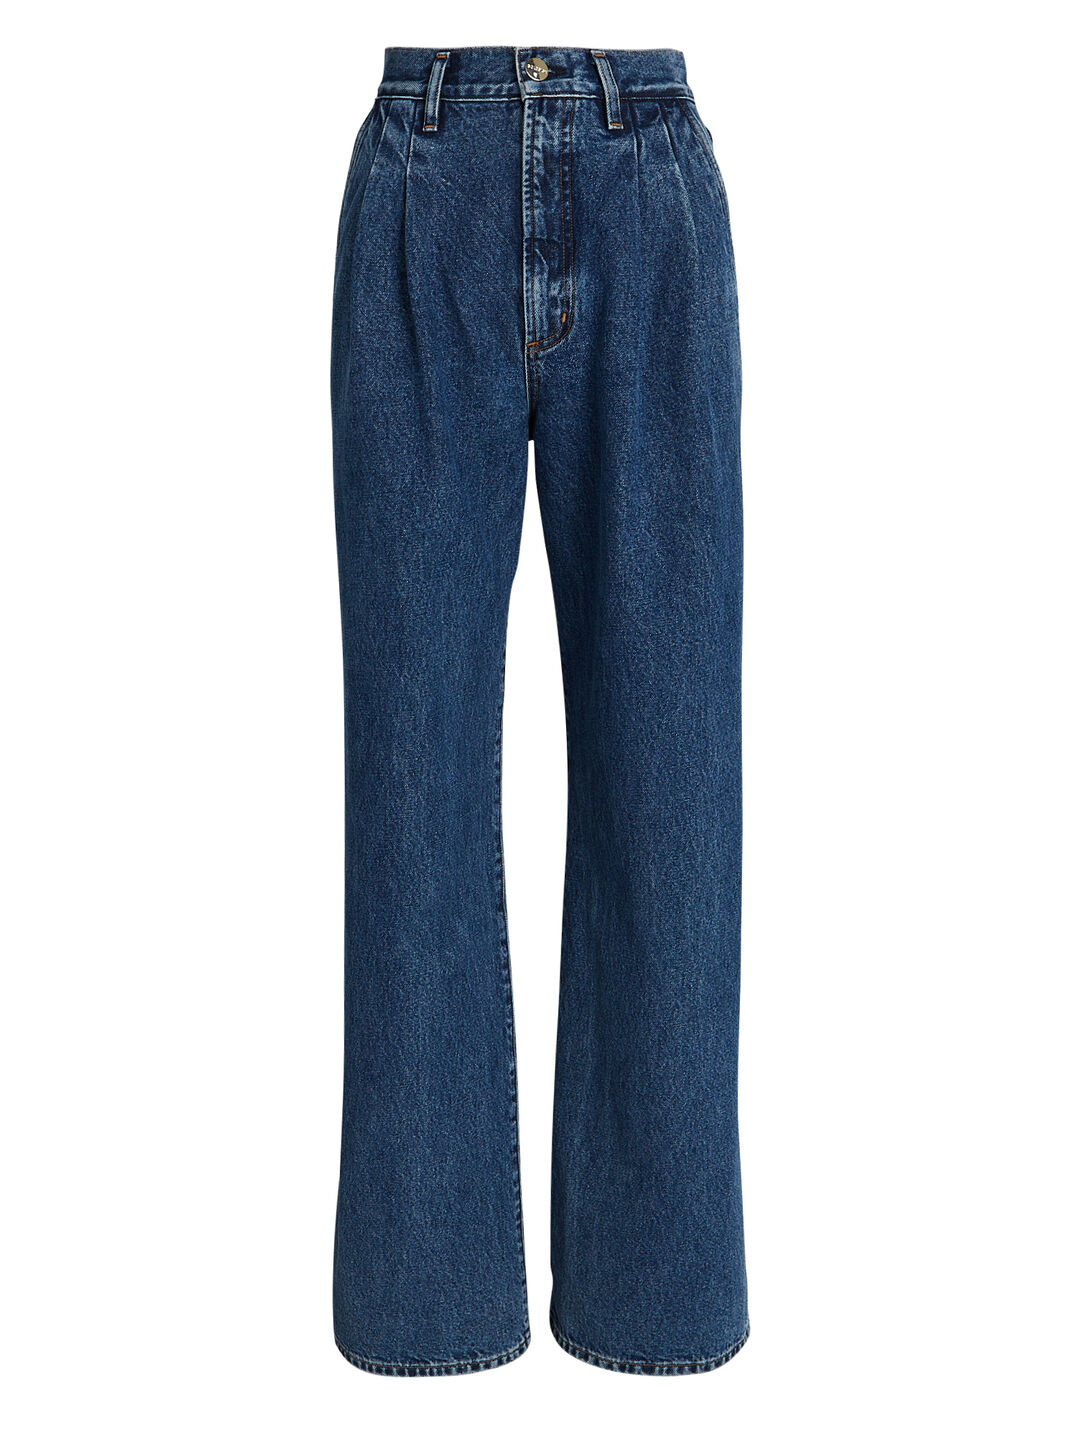 Edgar Trouser Puddle Jeans